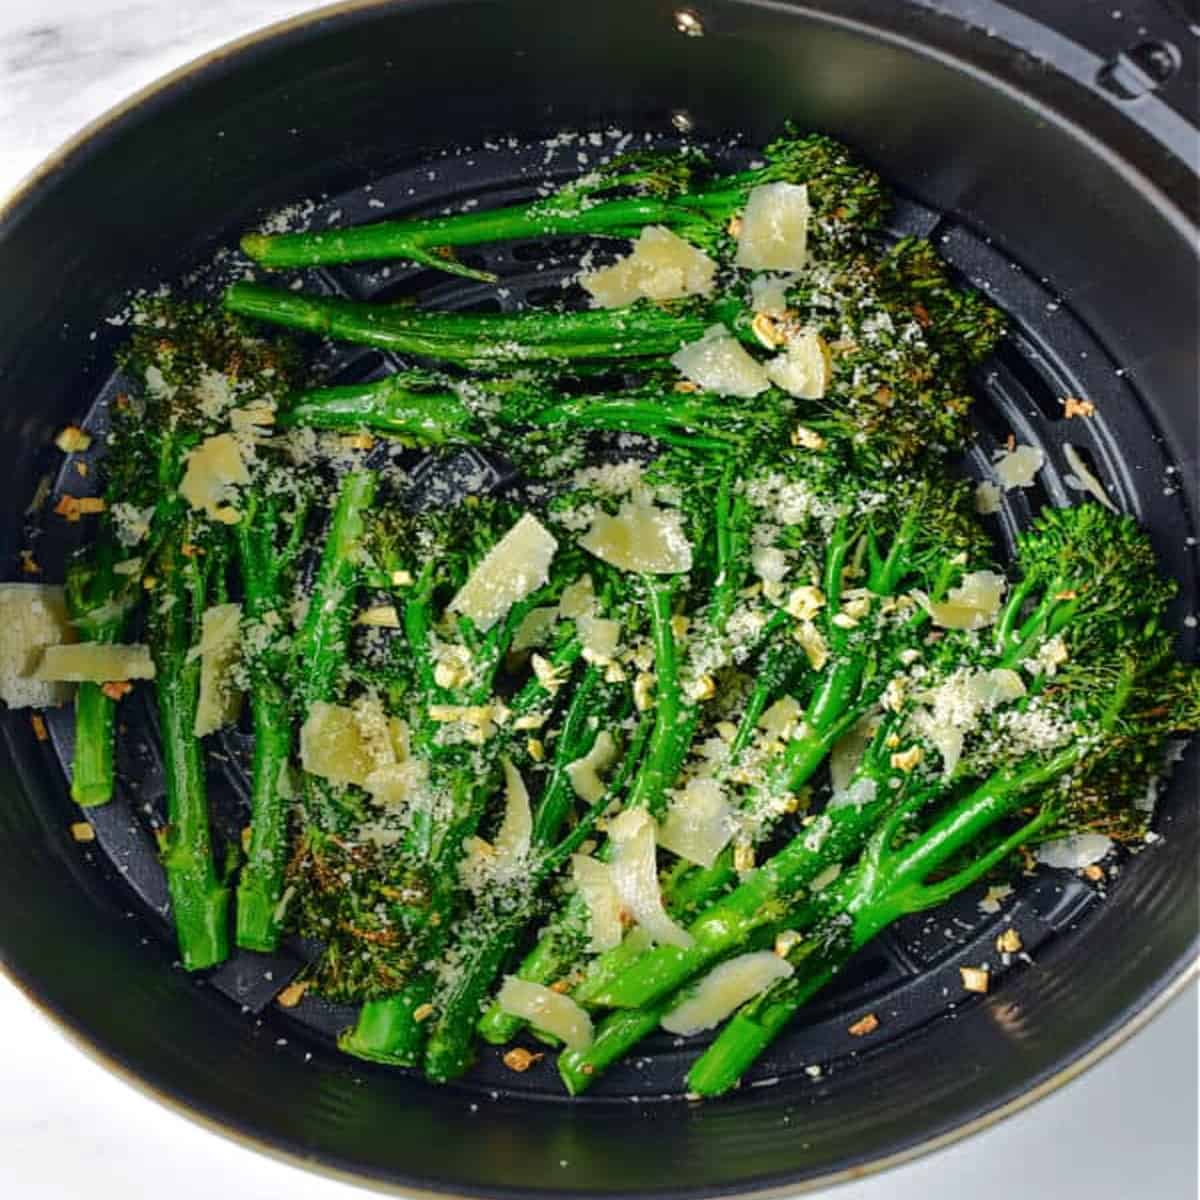 cooked broccolini in air fryer basket.